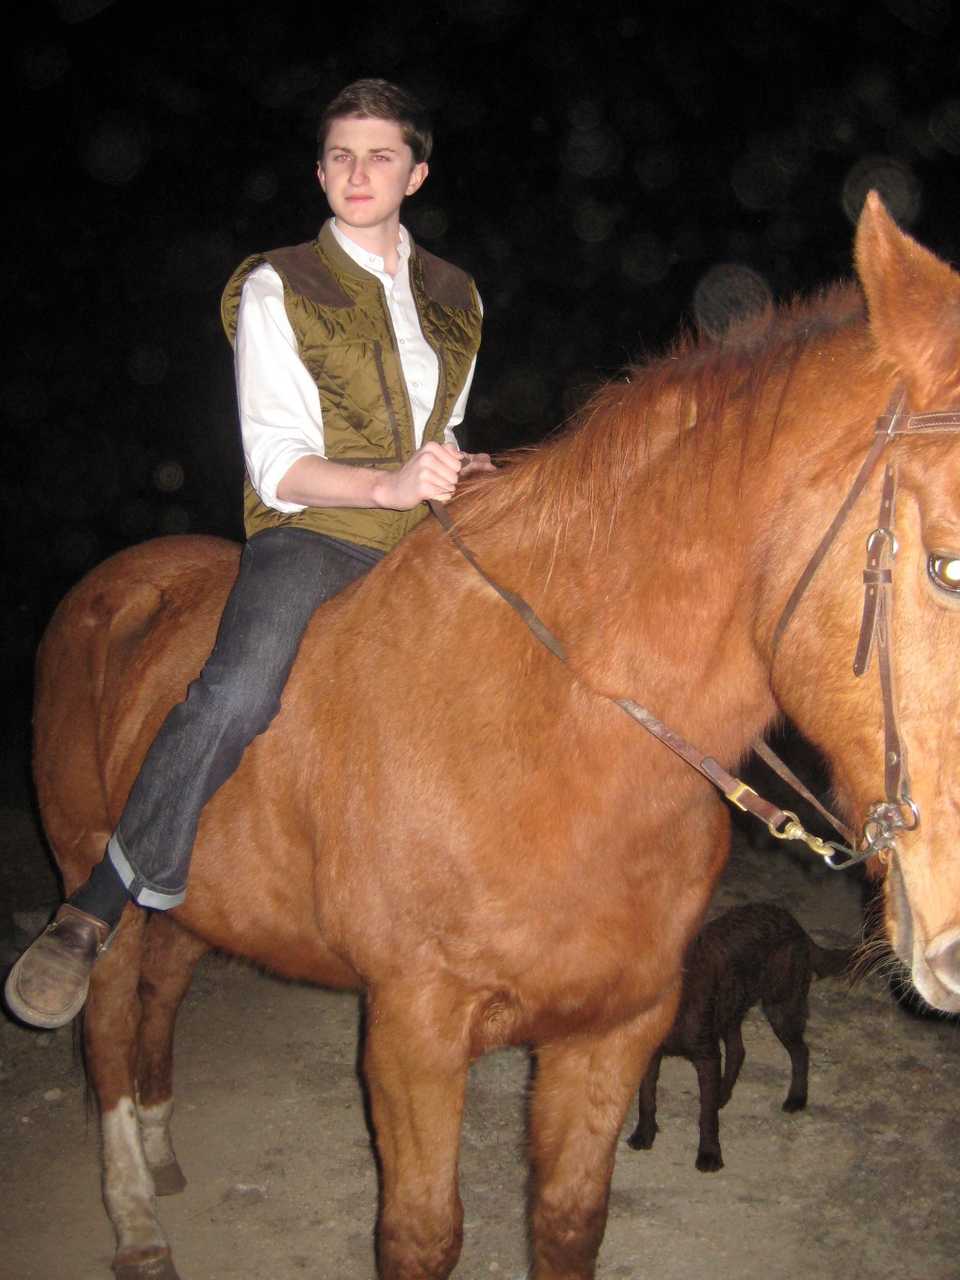 On Horse